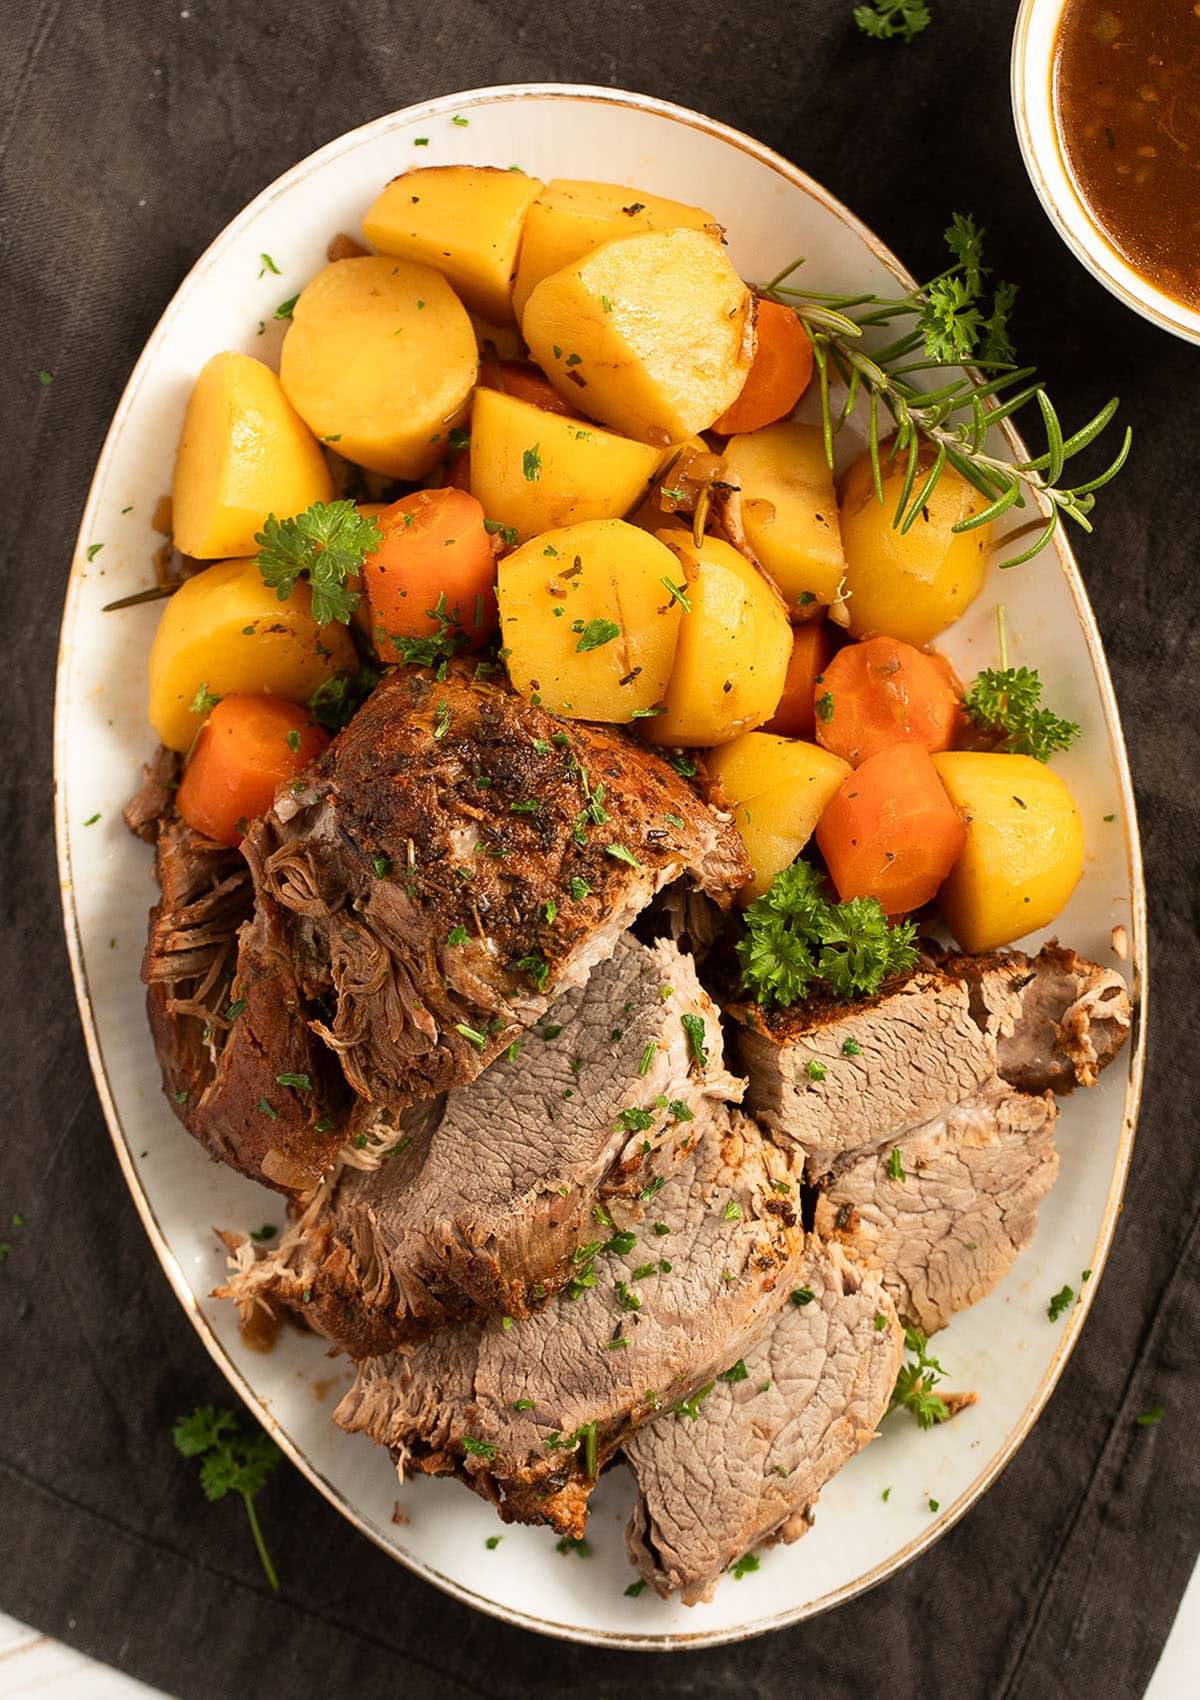 overhead view of a large oval platter with sliced pork roast, potatoes and carrots.